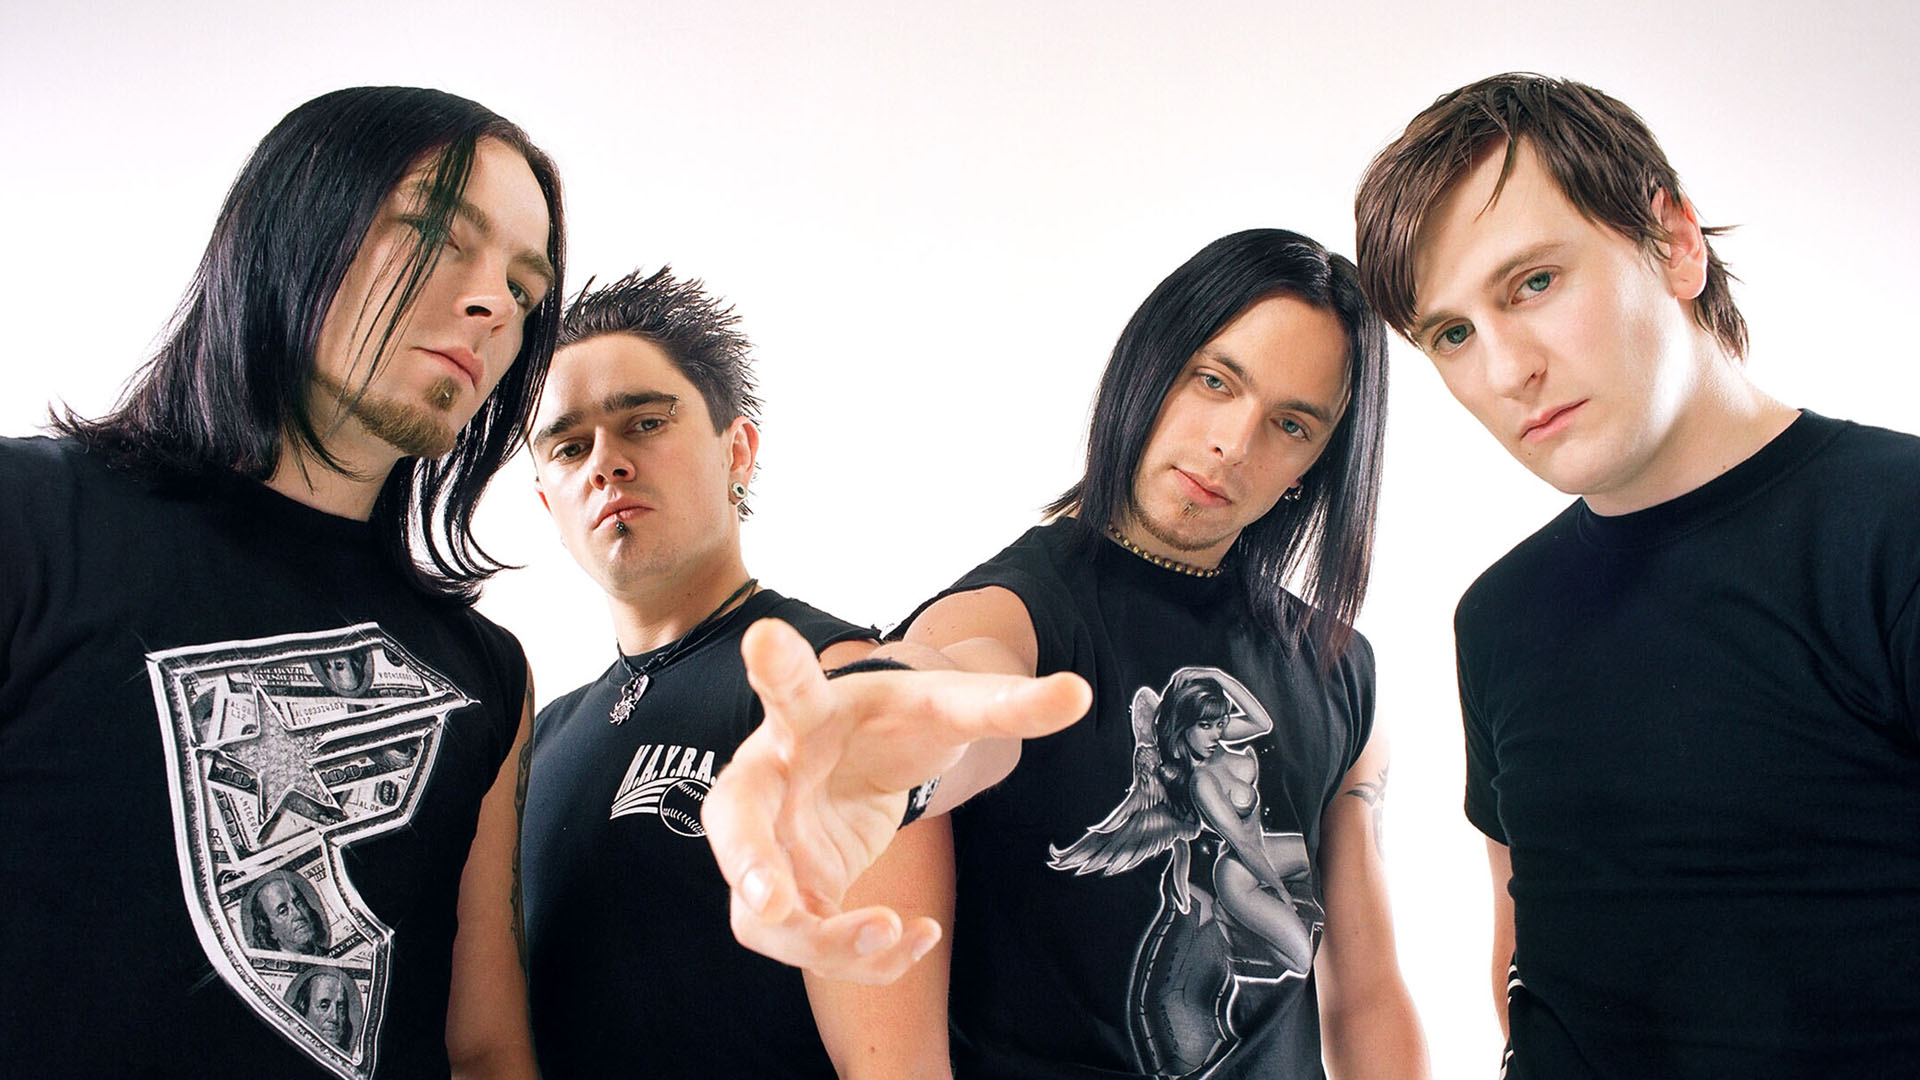 Music Bullet For My Valentine HD Wallpaper | Background Image